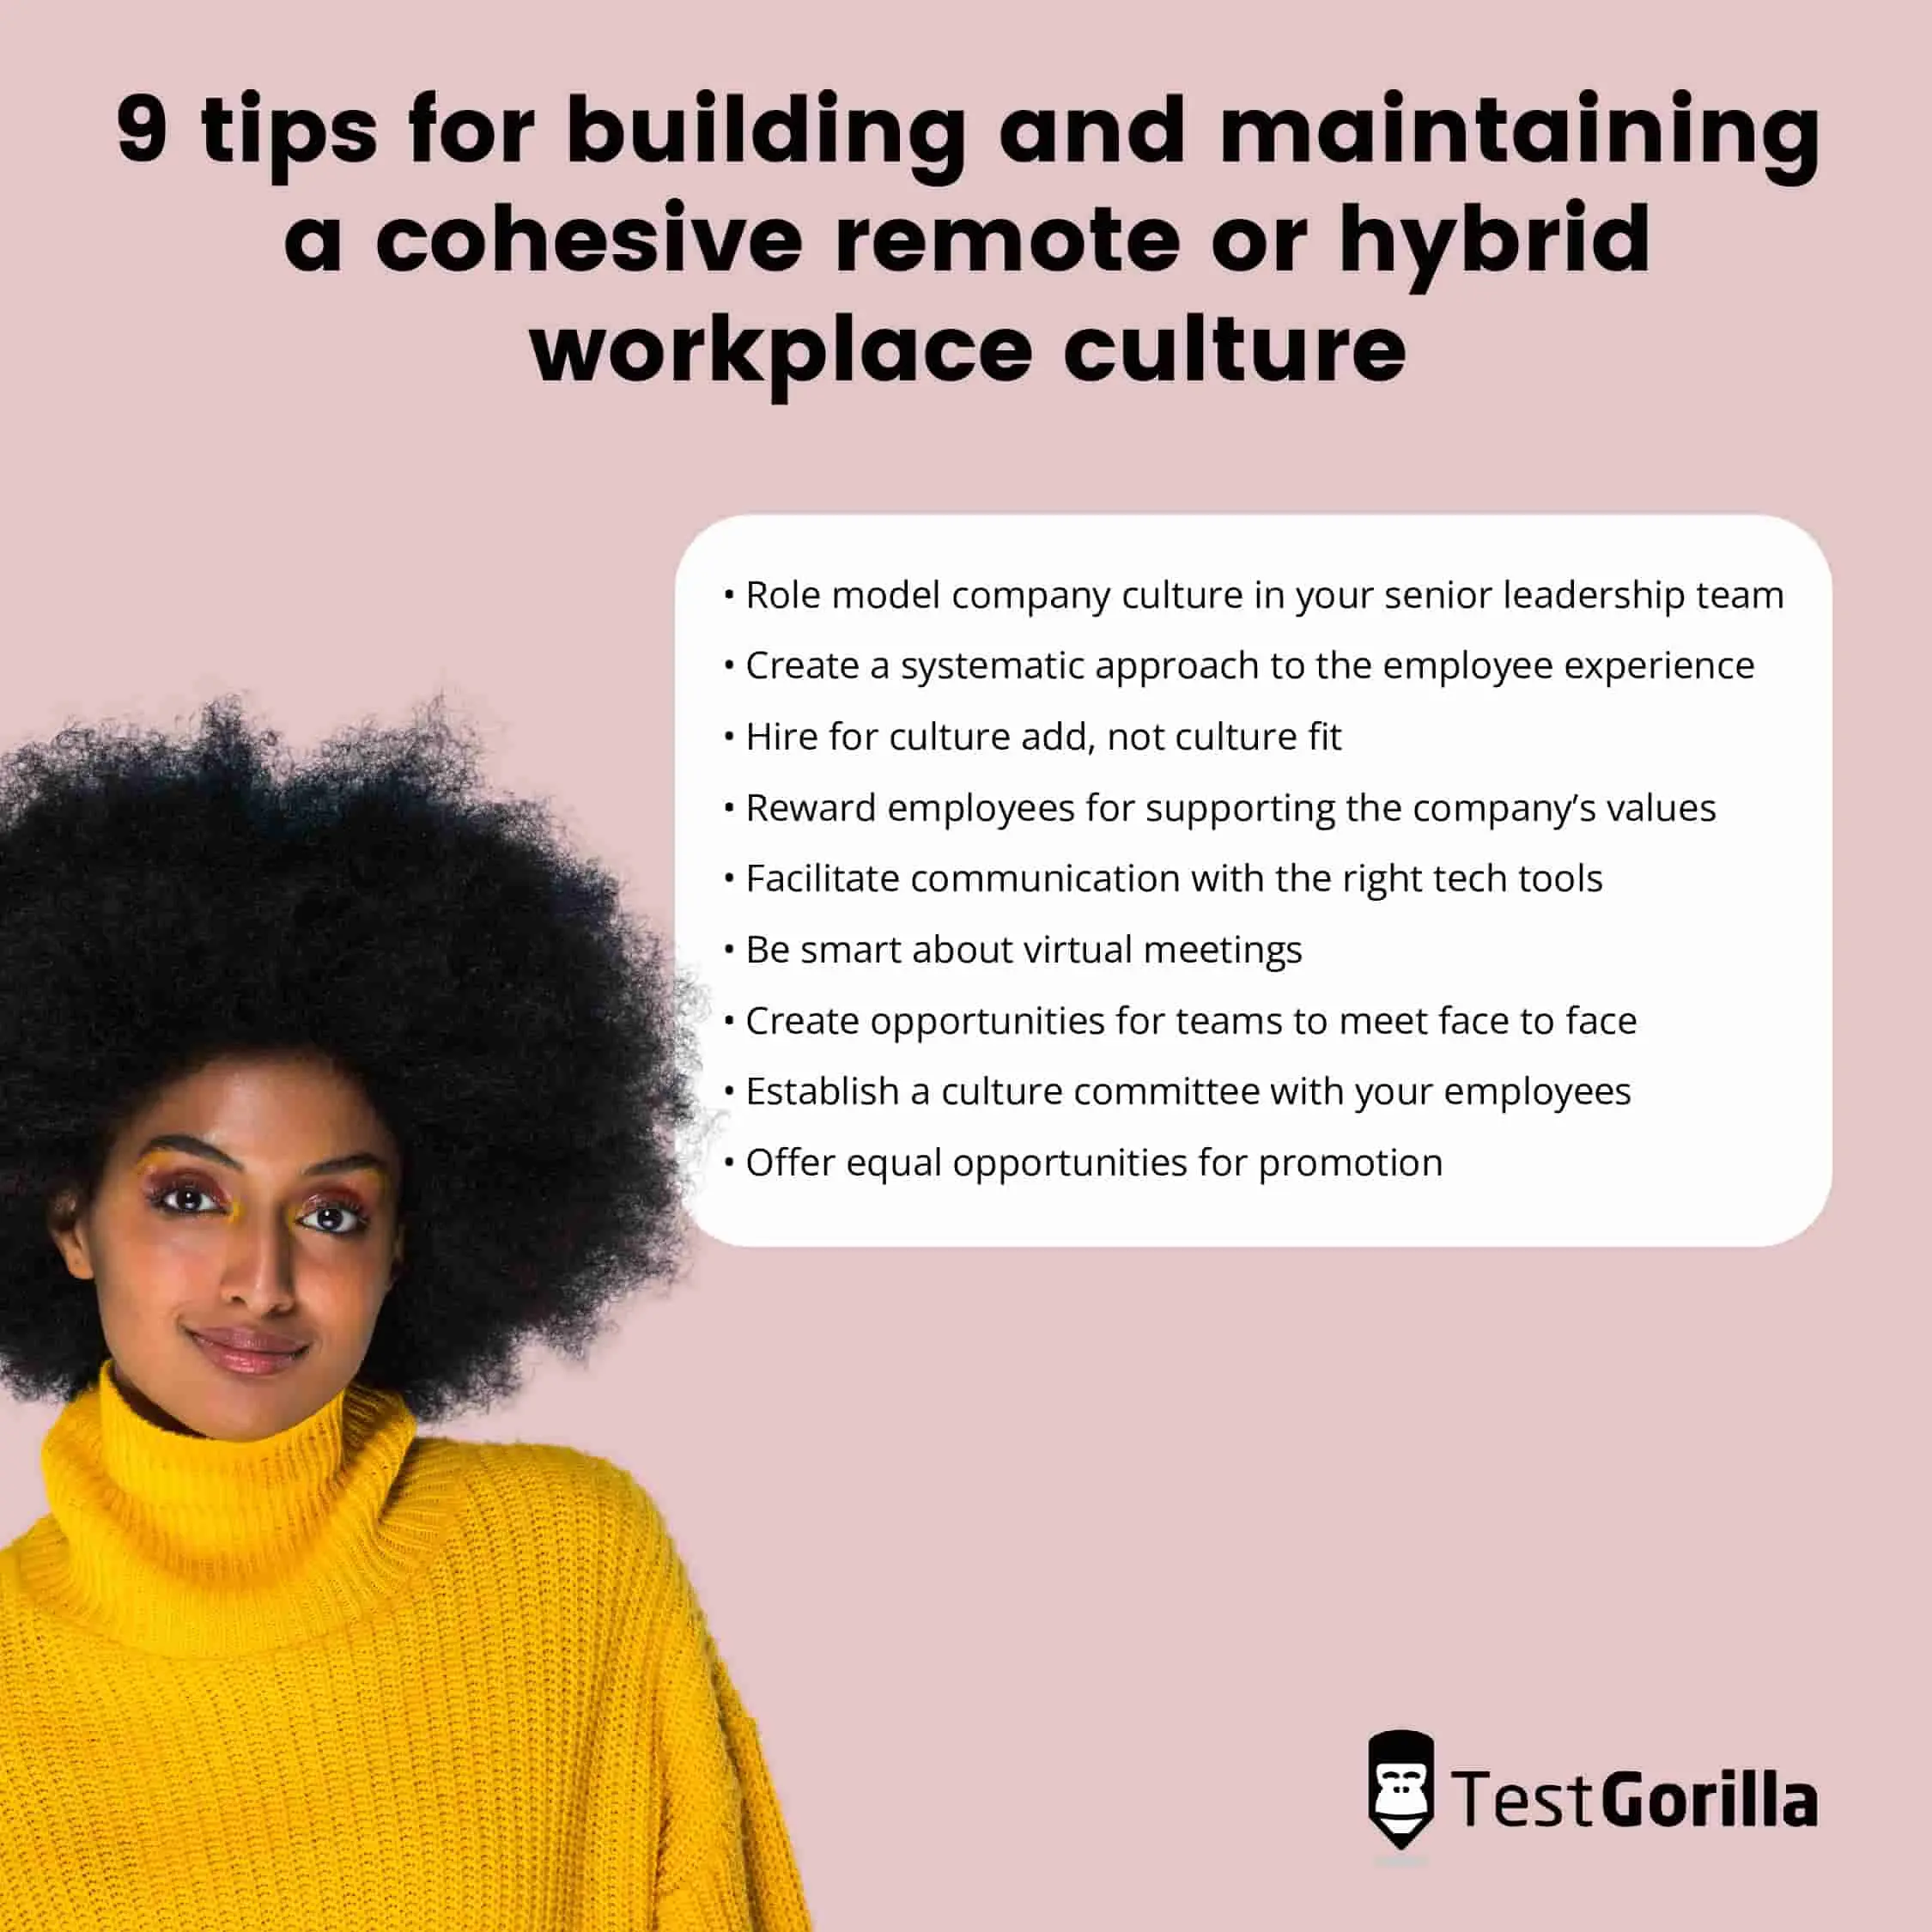 9 tips for building and maintaining a cohesive remote or hybrid workplace culture